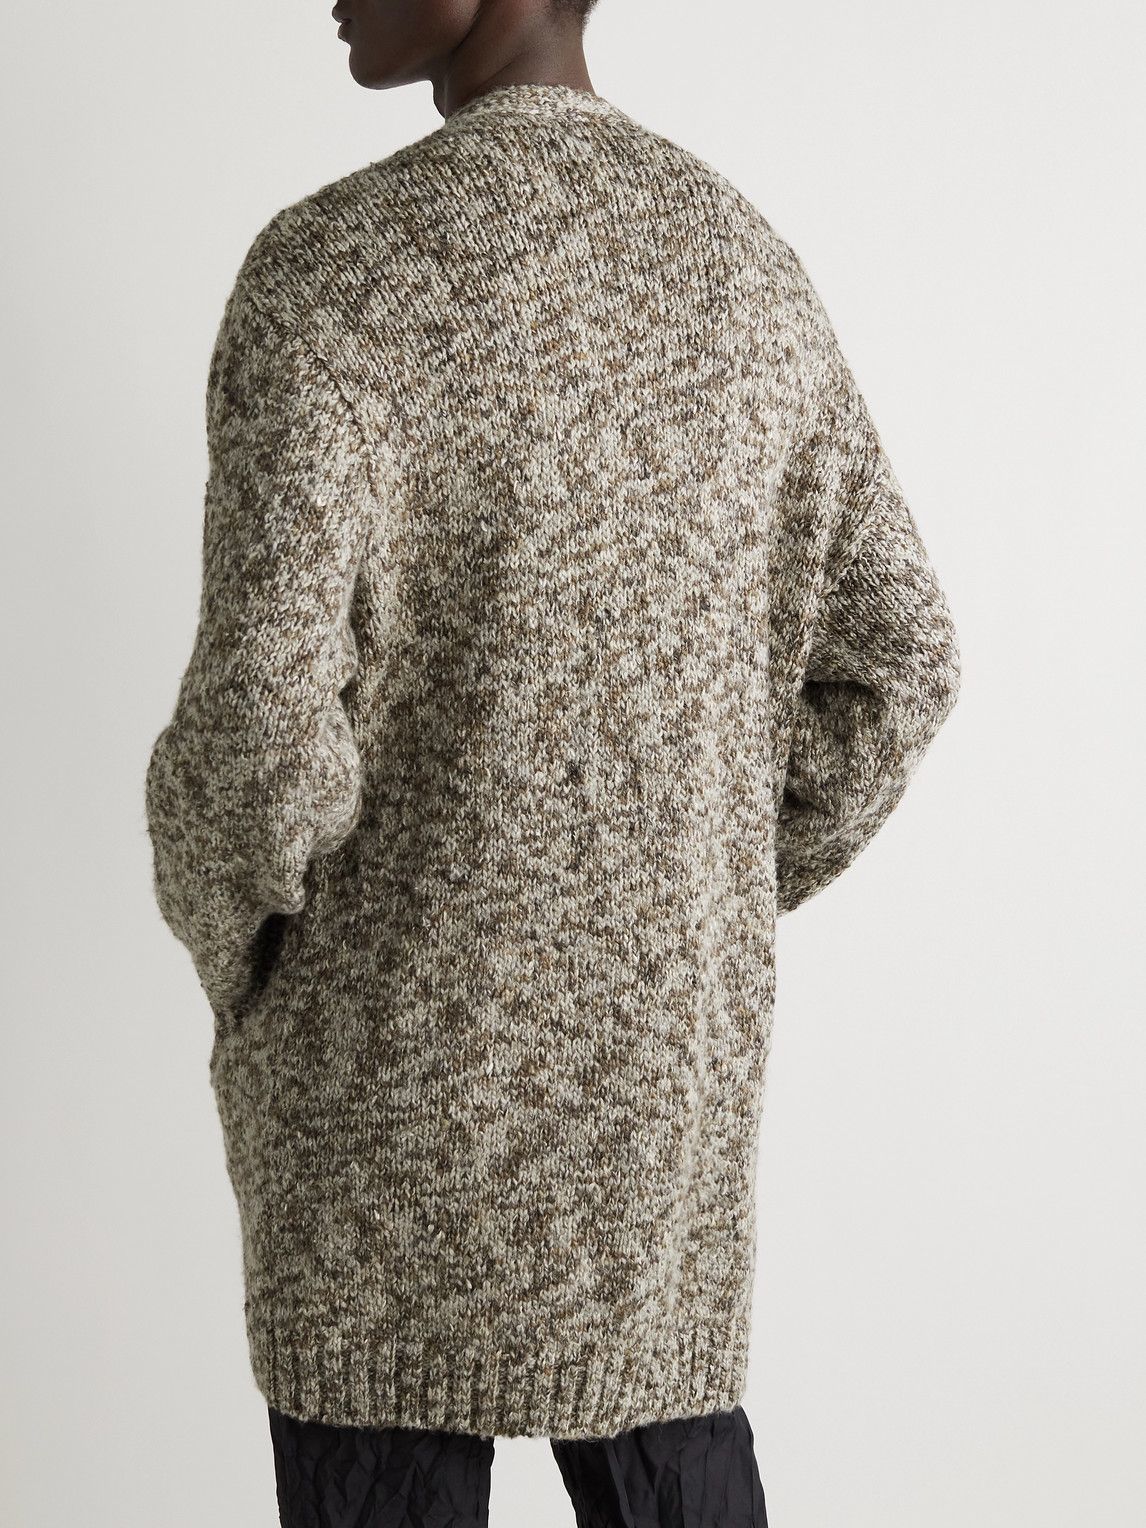 UNDERCOVER - Wool-Blend Cardigan - Gray Undercover